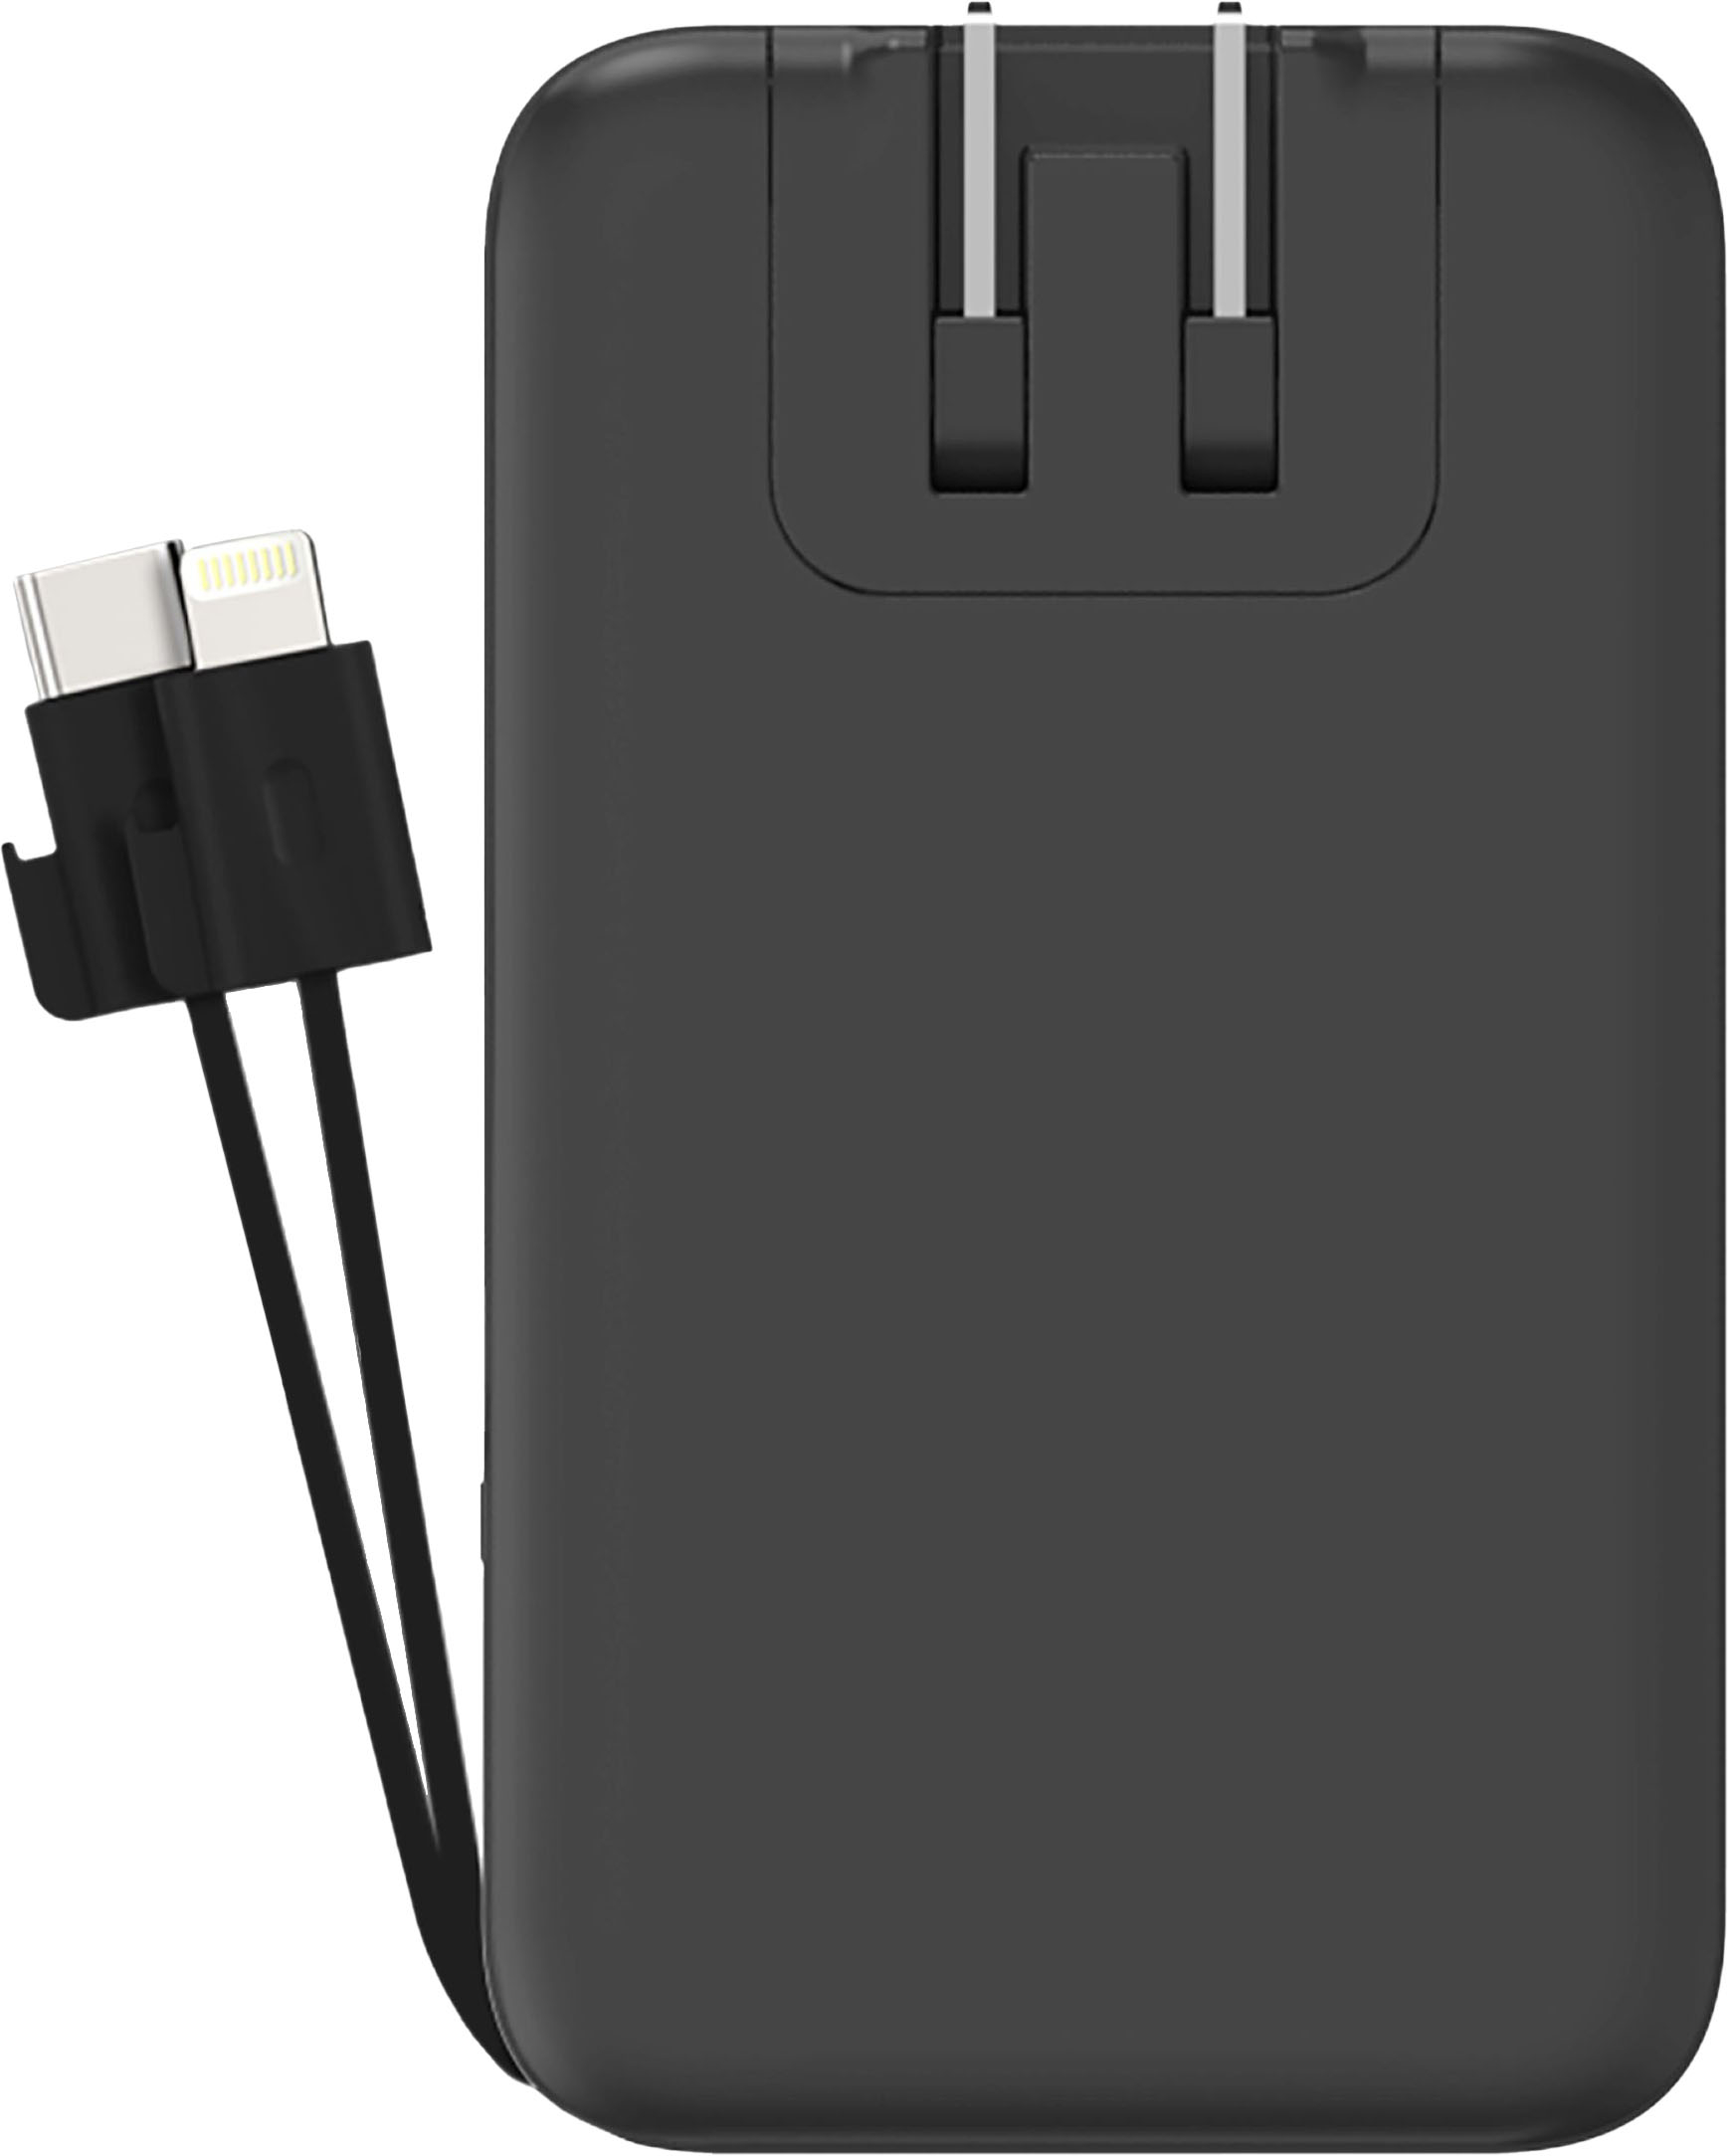 Angle View: myCharge - POWERHUB PLUS 6,000mAh Everything Built-In Portable Charge for Most USB Enables Devices - Black